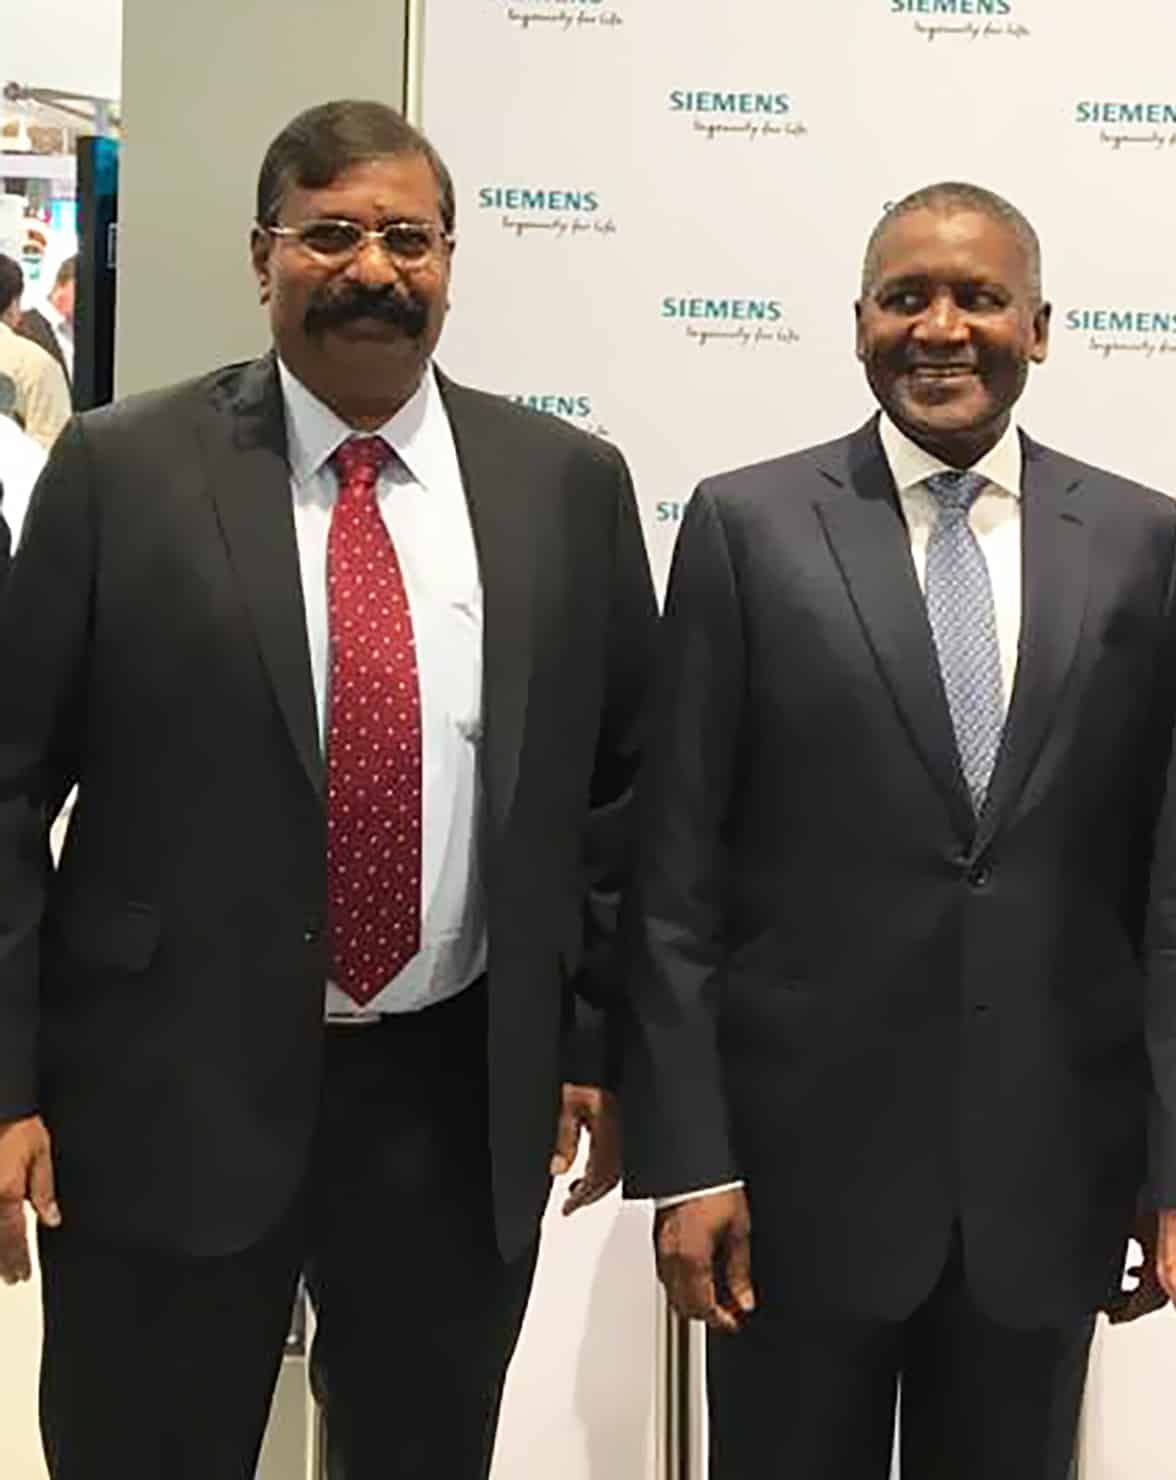 Dangote Wins Awards, Pledges to Boost Engineering Profession